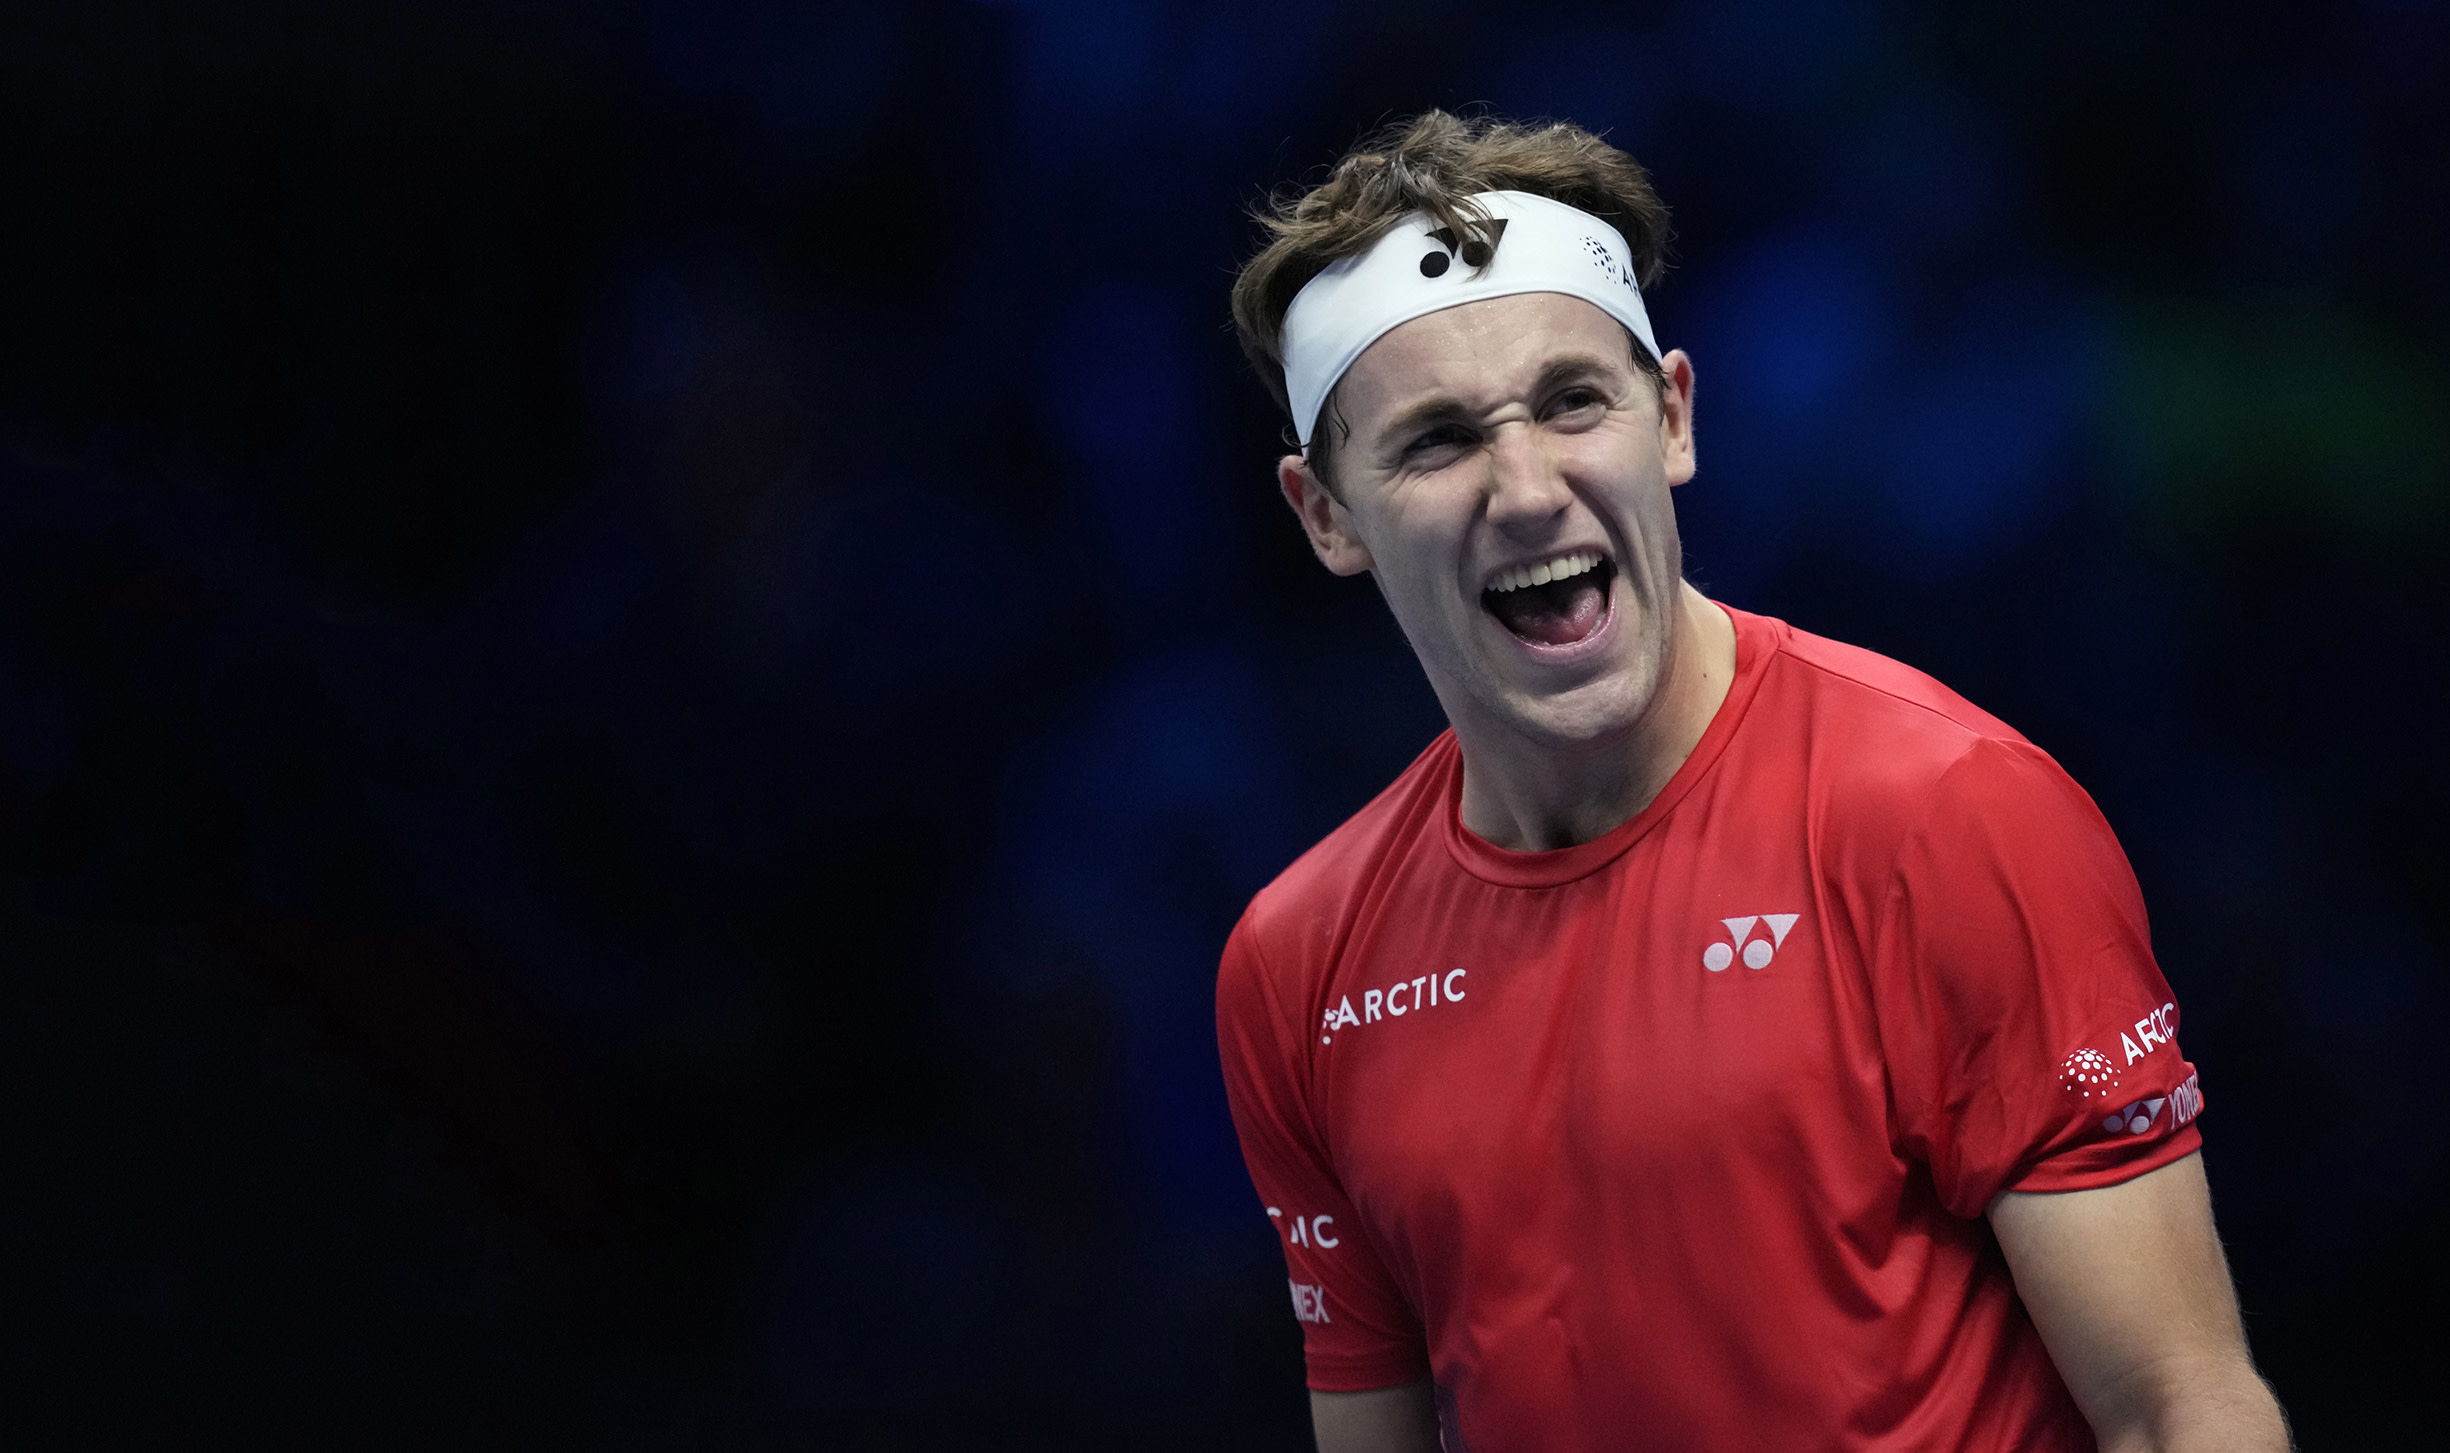 ATP Tour Finals Highlights: Casper Ruud sails past Andrey Rublev in straight sets to enter maiden final at ATP Tour Finals - Watch Highlights